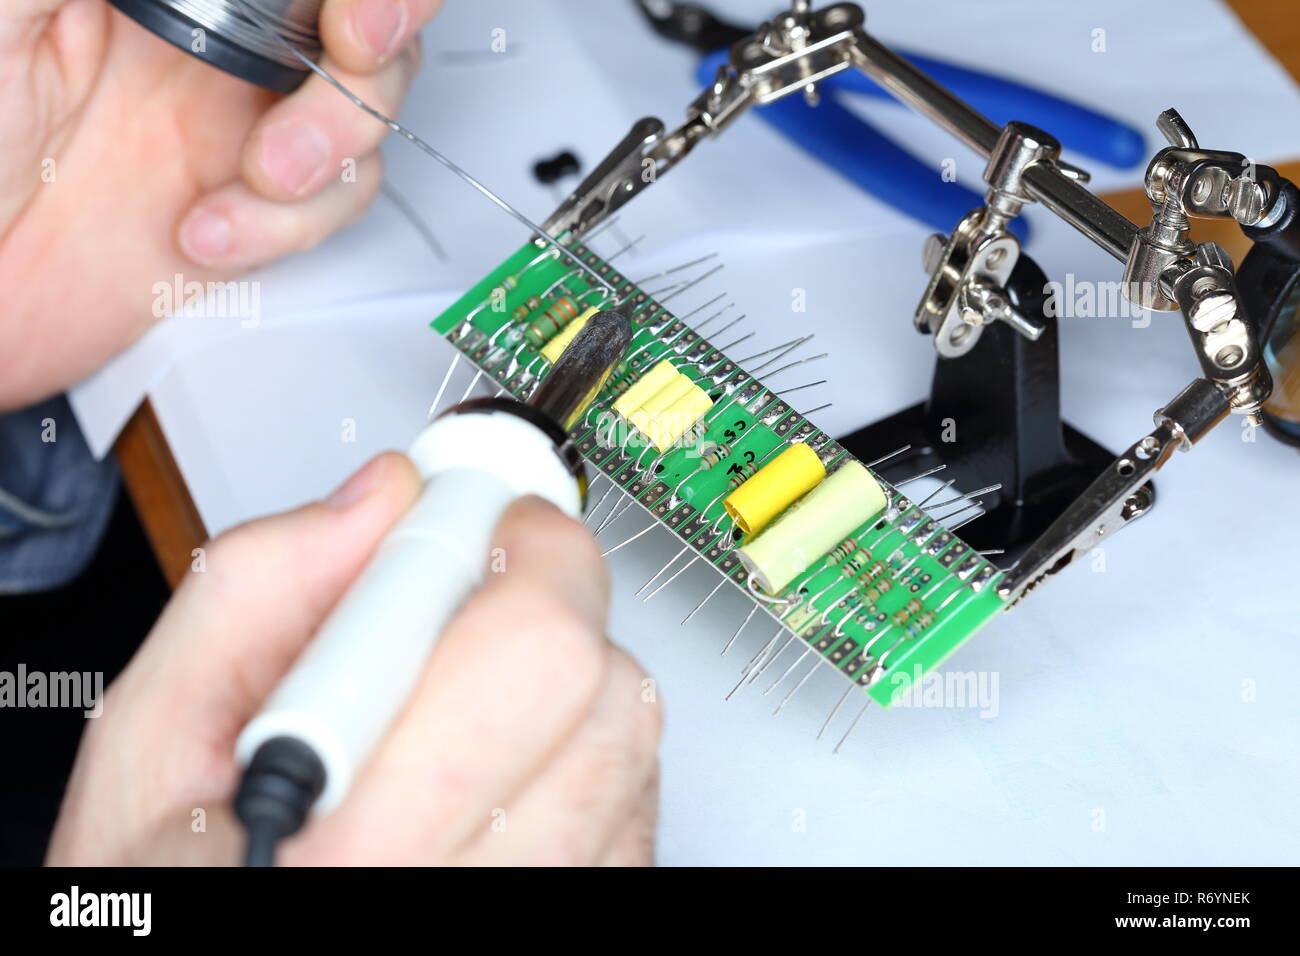 soldering on an electronics board Stock Photo